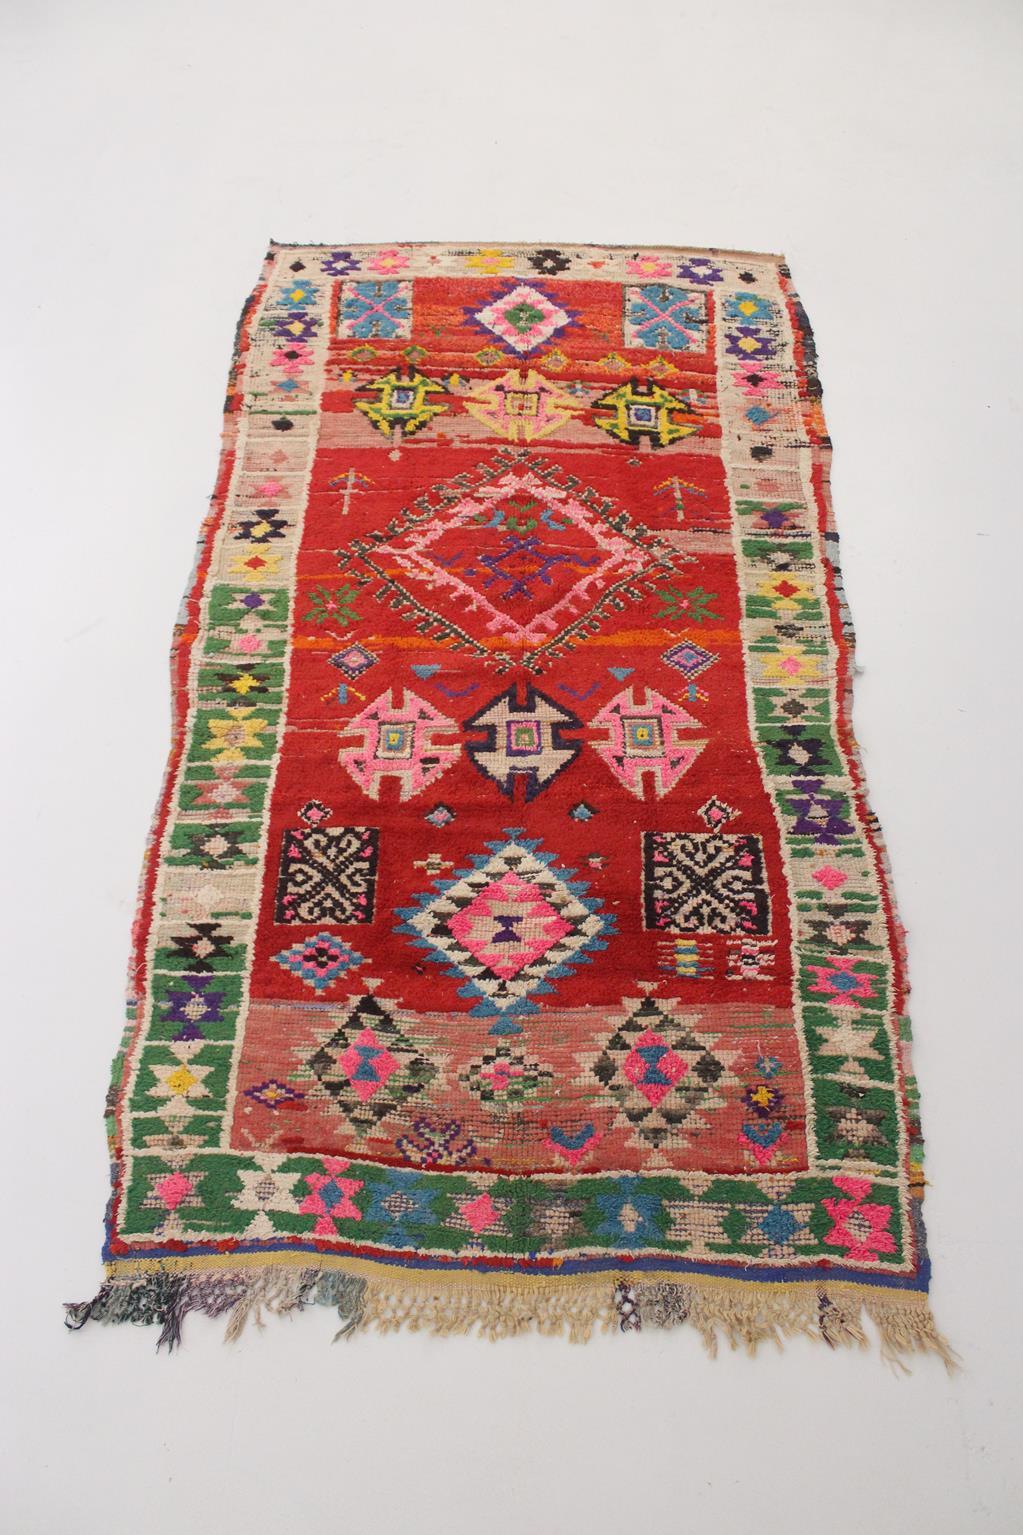 Vintage Moroccan Boucherouite rug- Red/rainbow - 4-4.6x8.5feet / 123-140x260cm In Good Condition For Sale In Marrakech, MA